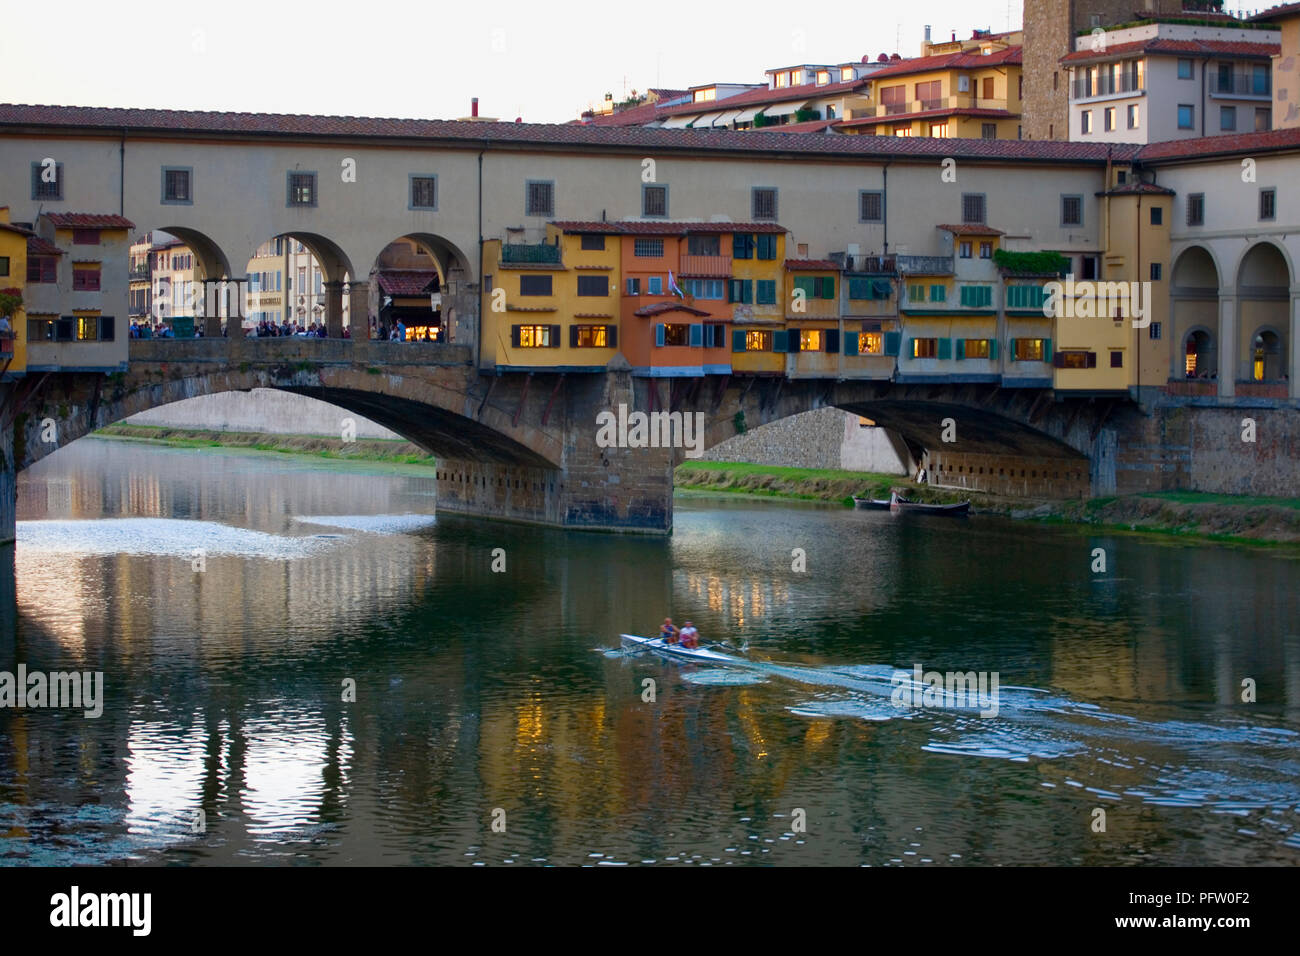 Dusk over the river Arno in Florence, Tuscany, Italy, with the Ponte Vecchio spanning the river and a double scull in foreground Stock Photo